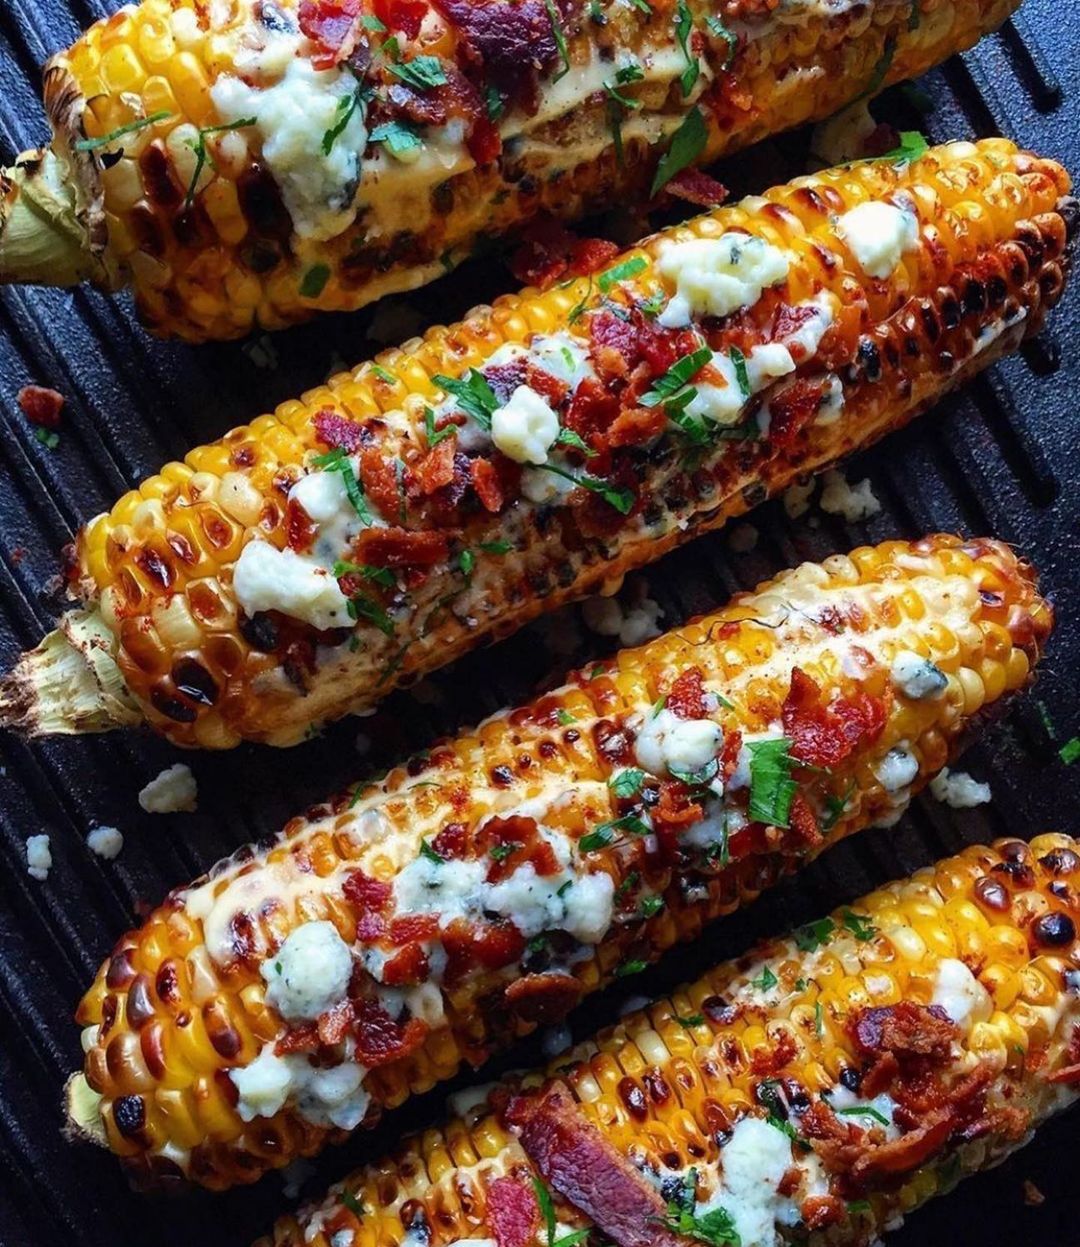 Grilled Corn on a Cast Iron Griddle. Photo by Instagram user @barbecuebeast